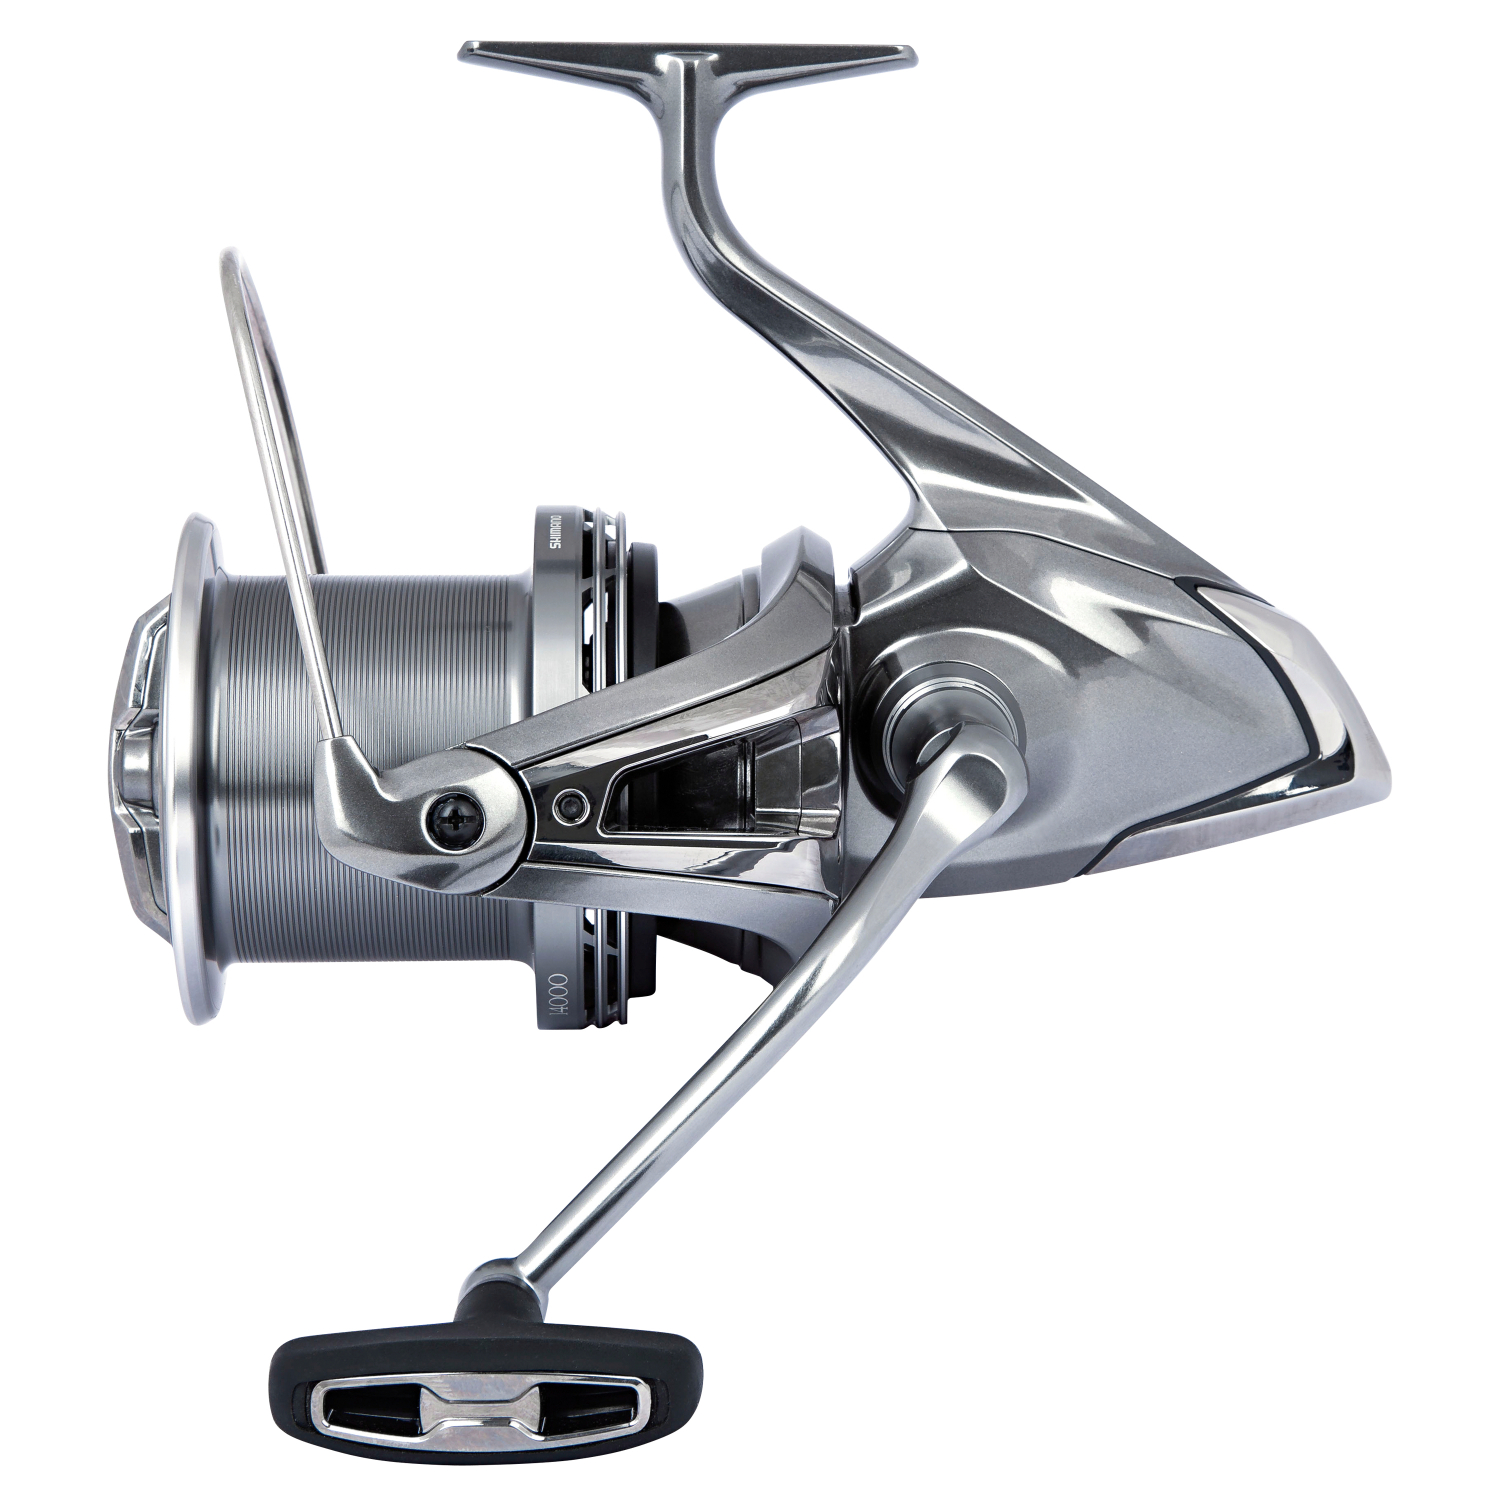 Shimano Stationary reel Aero Technium MGS at low prices